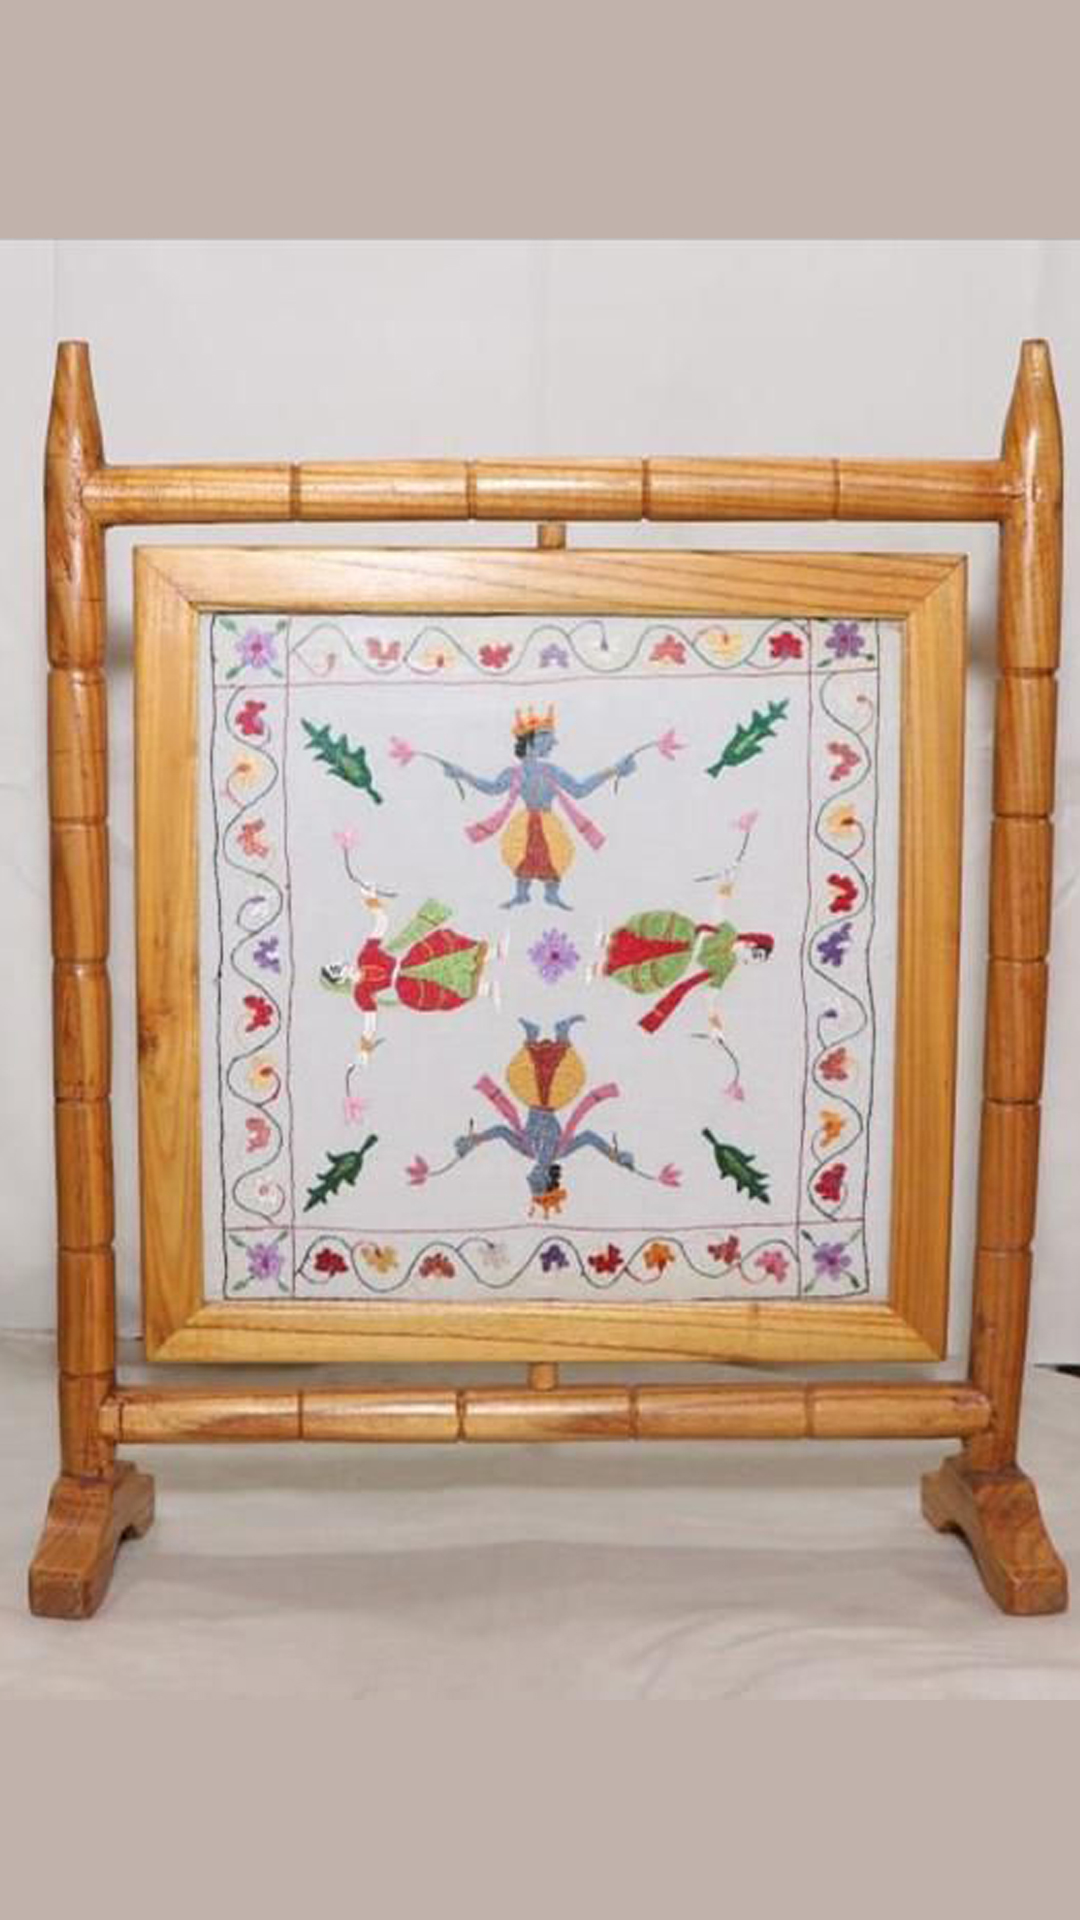 Chamba Rumal art form represents unique embroidery and was often used as gift wrap during 17th, 18th centuries.